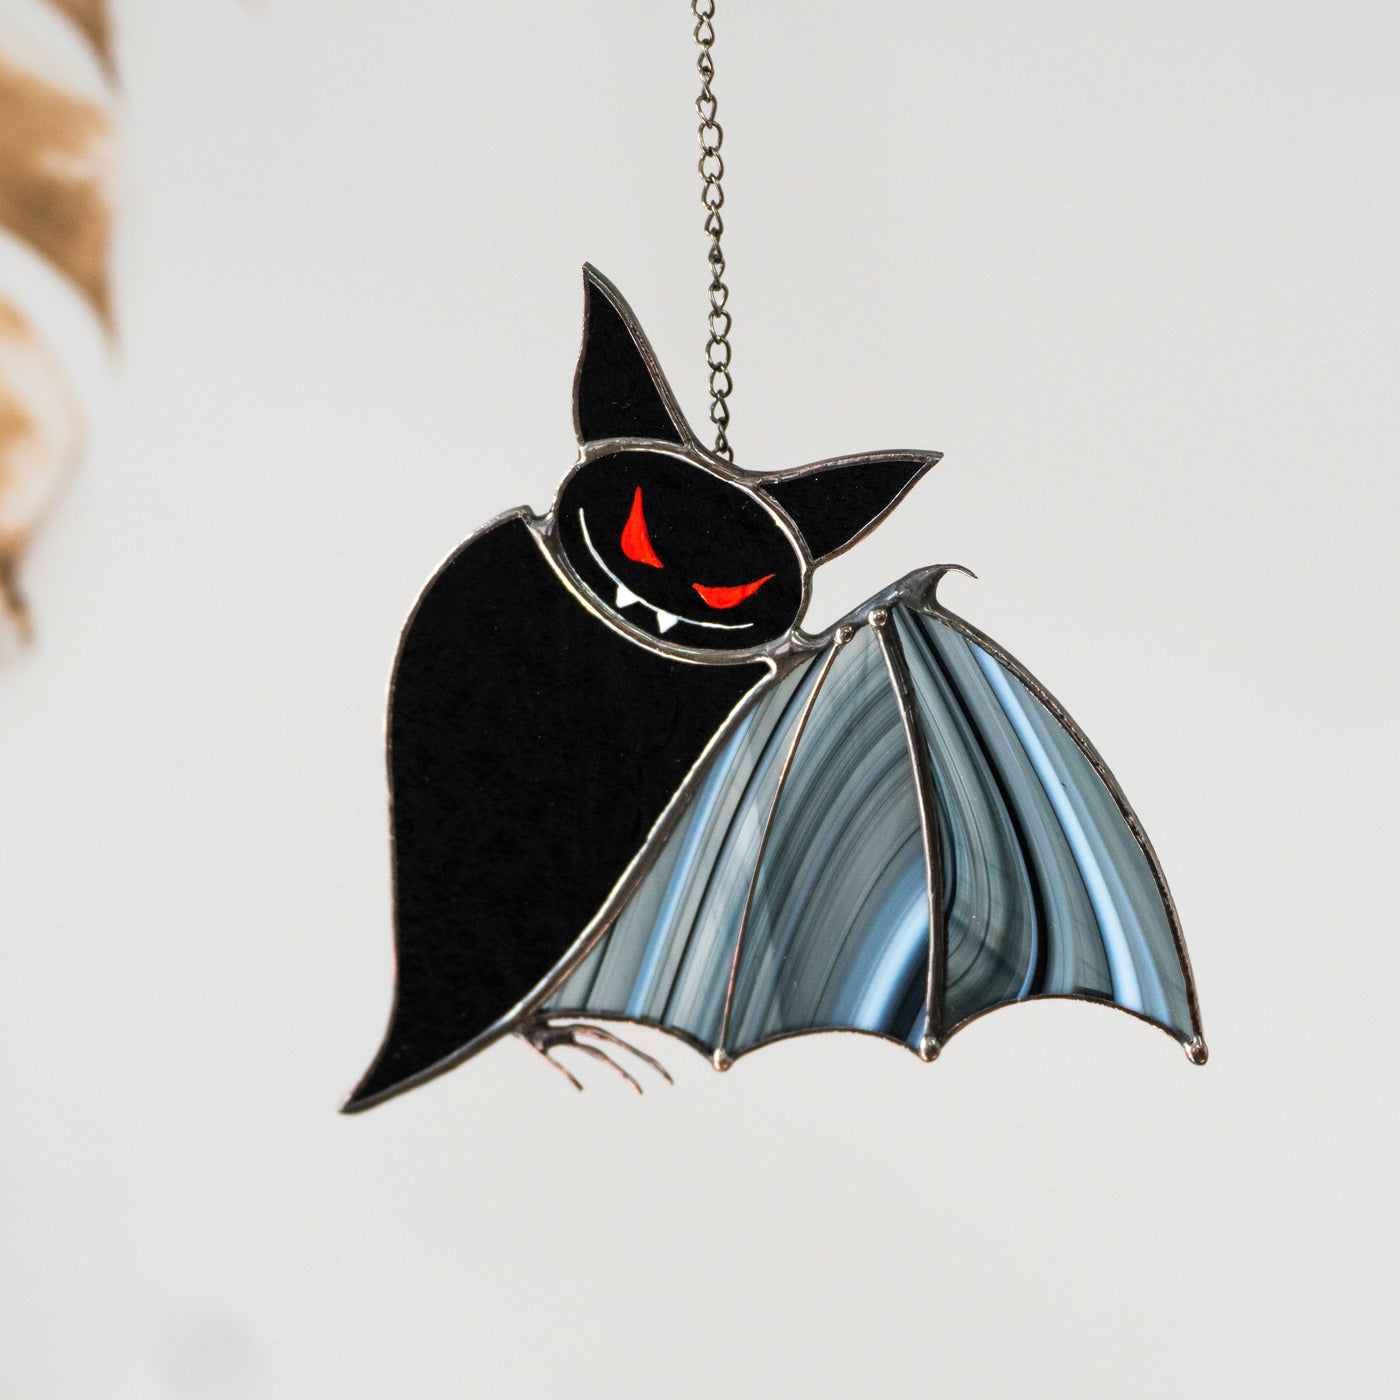 Stained glass black bat with red eyes and baroque wings suncatcher